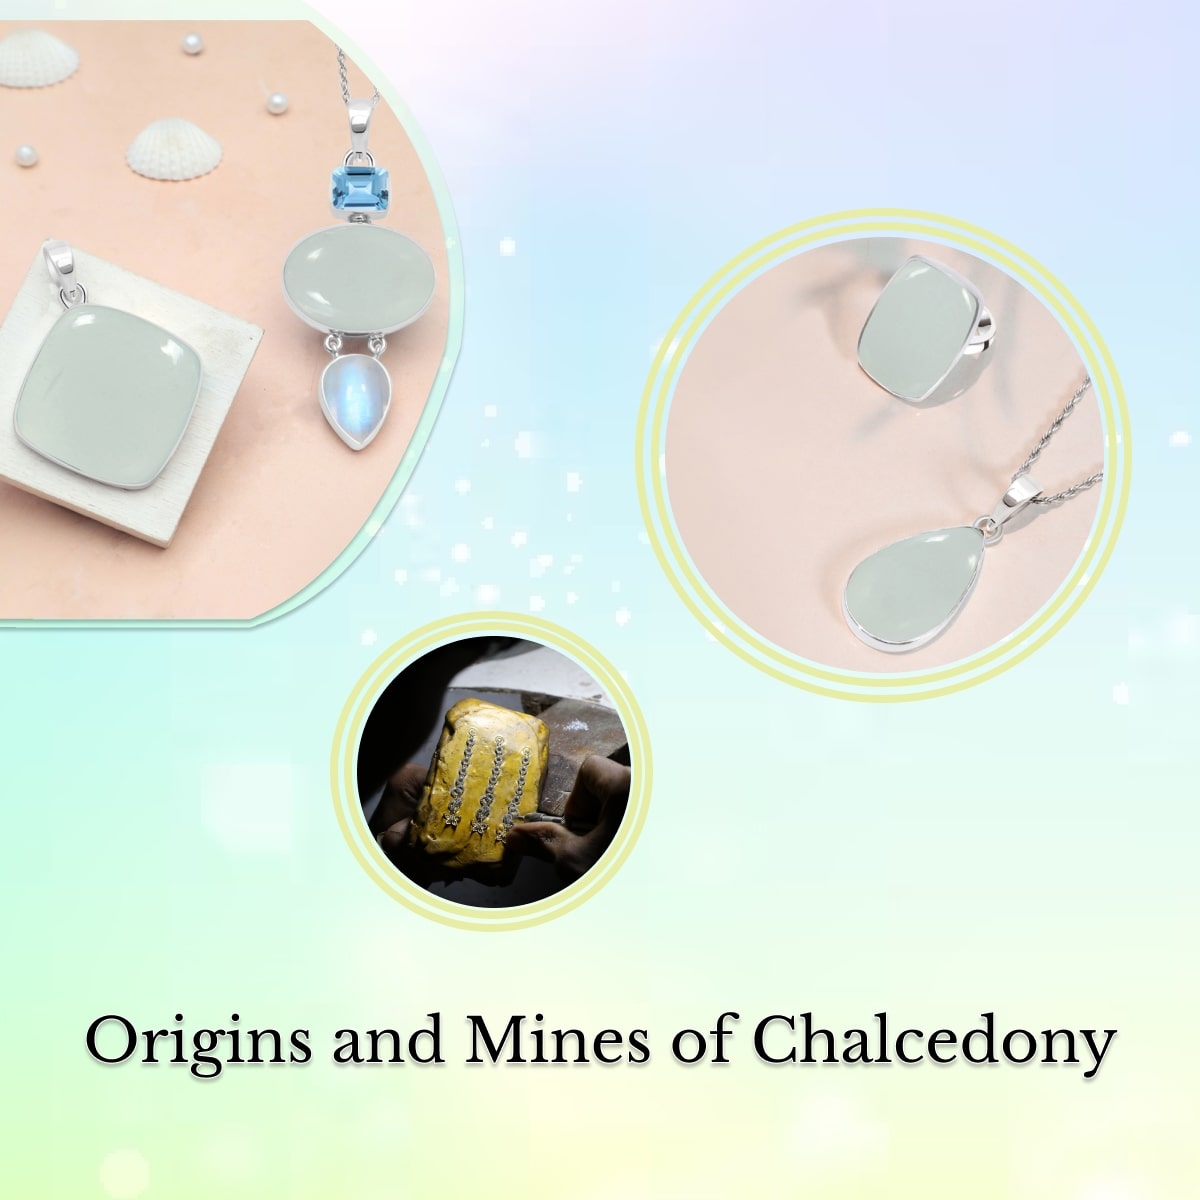 Chalcedony’s Formation and Mining Locations